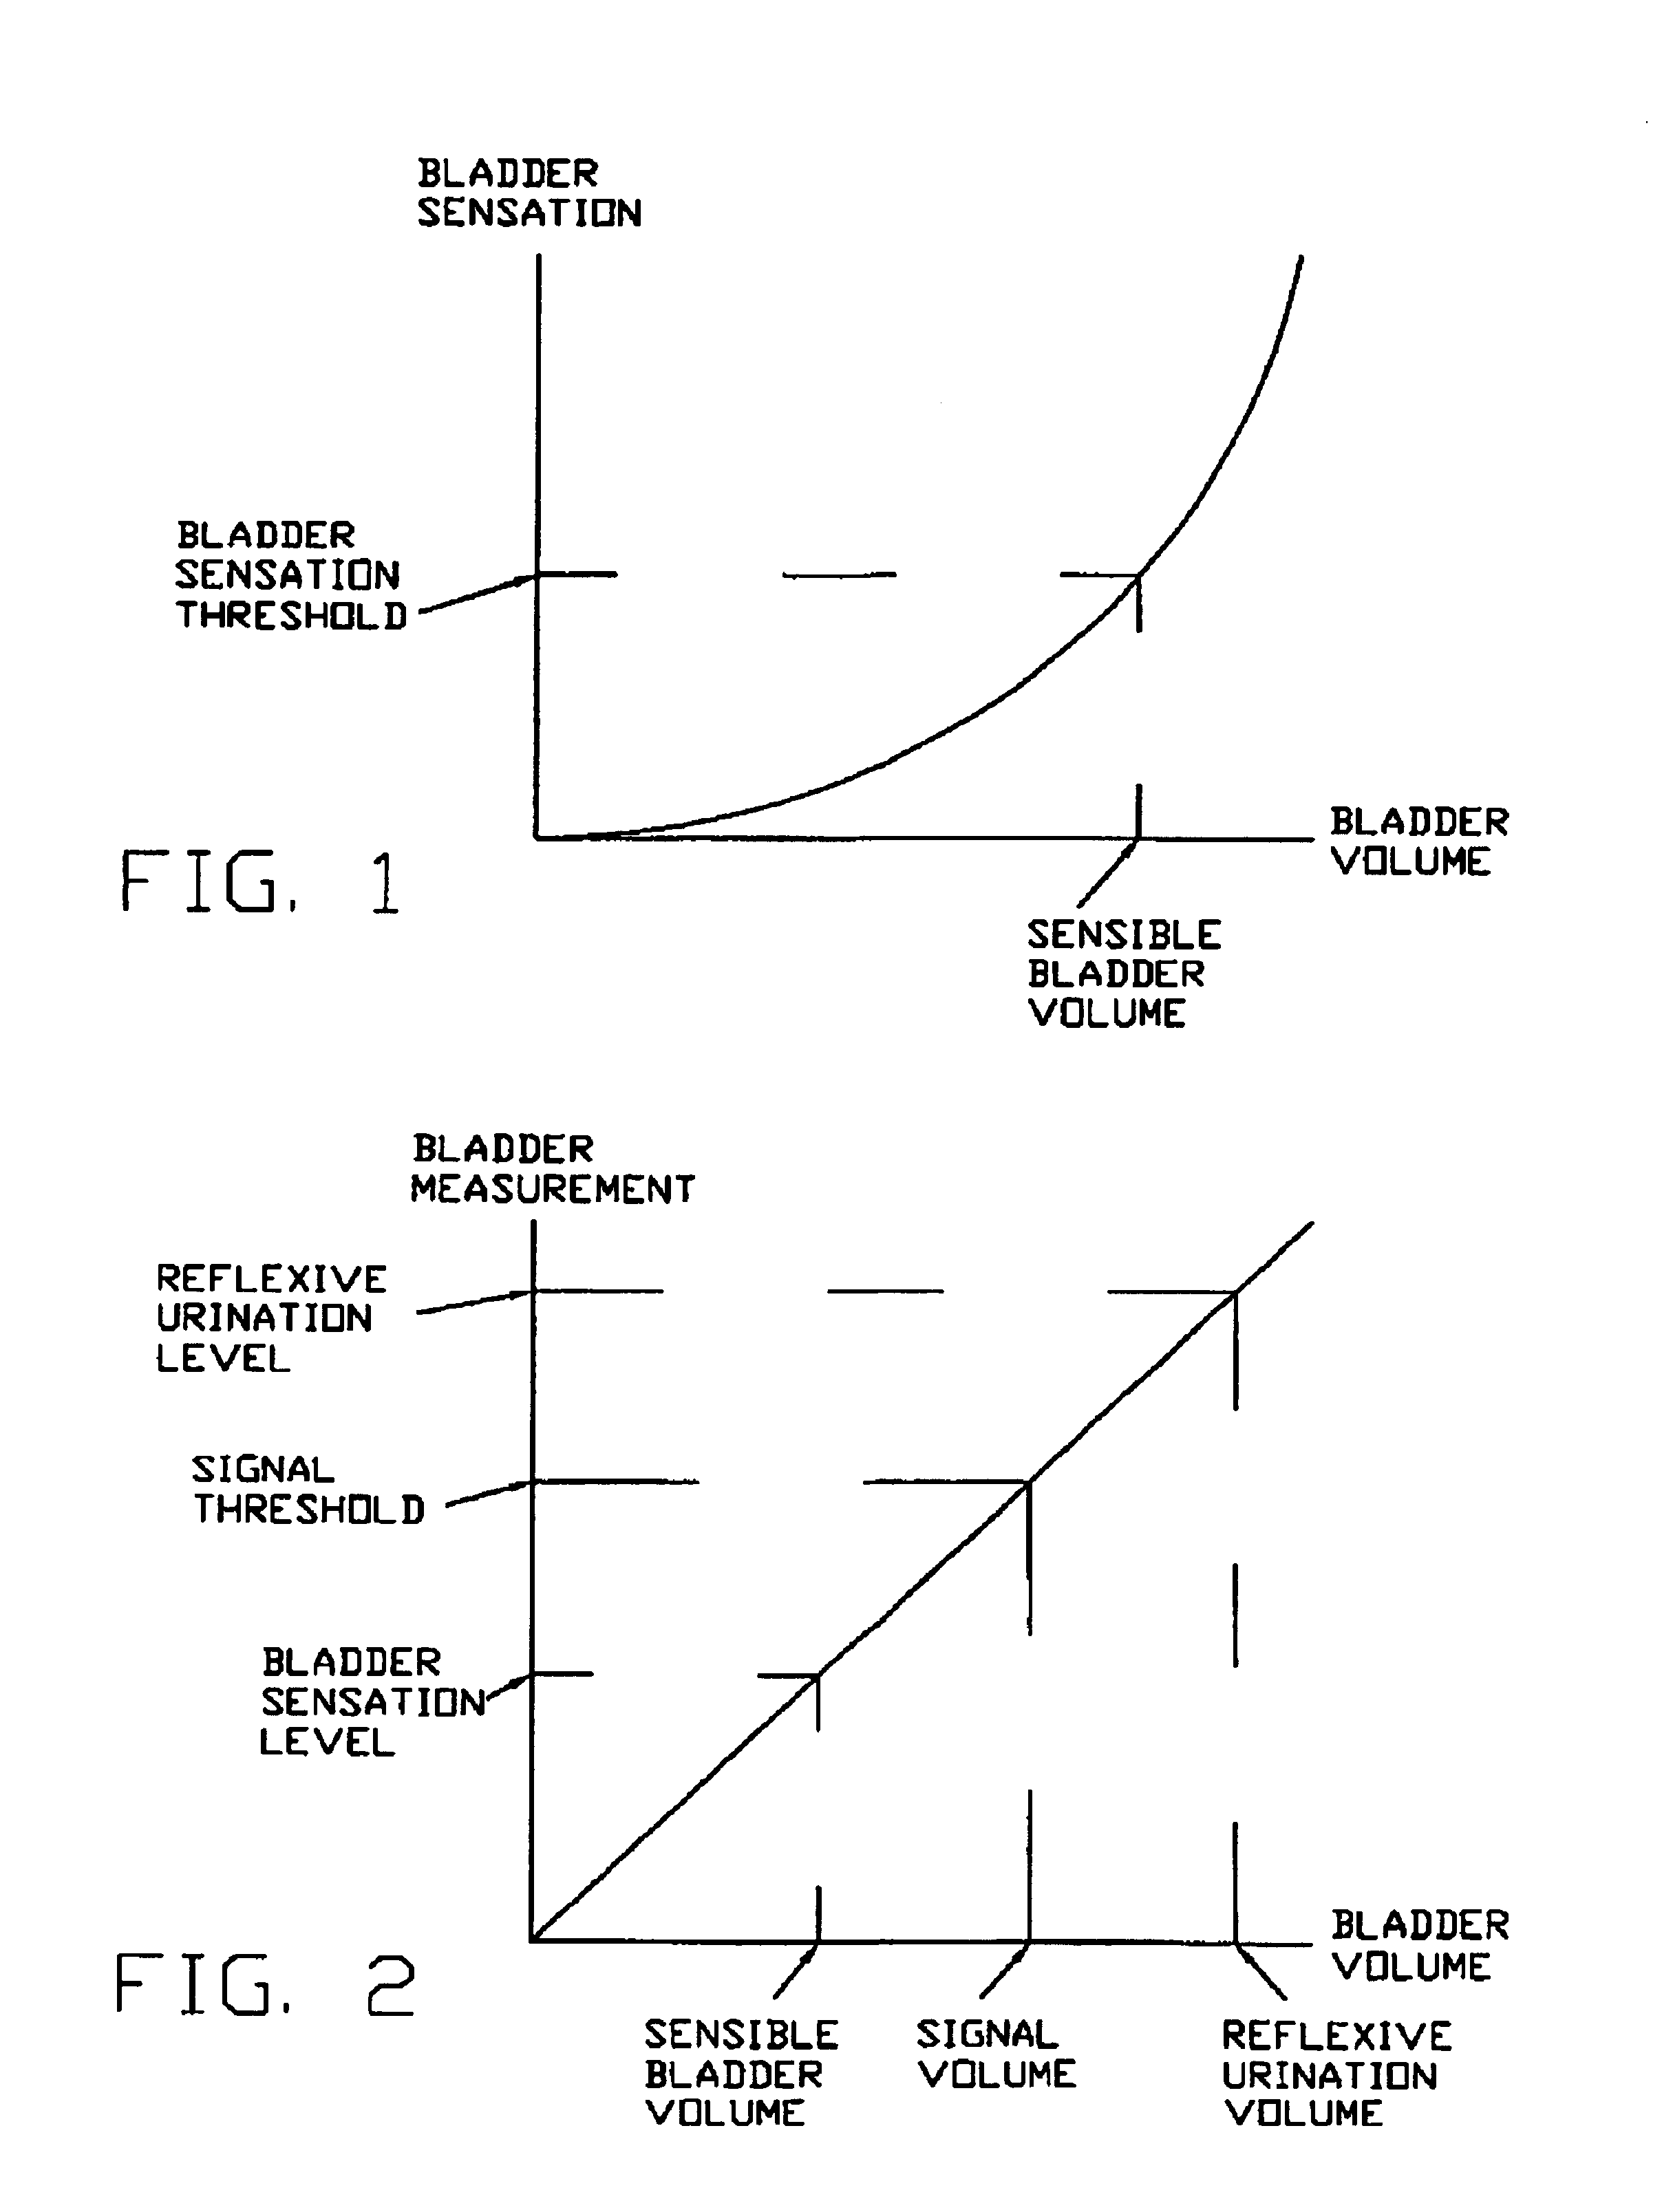 Method of urinary continence training based on an objective measurement of the bladder